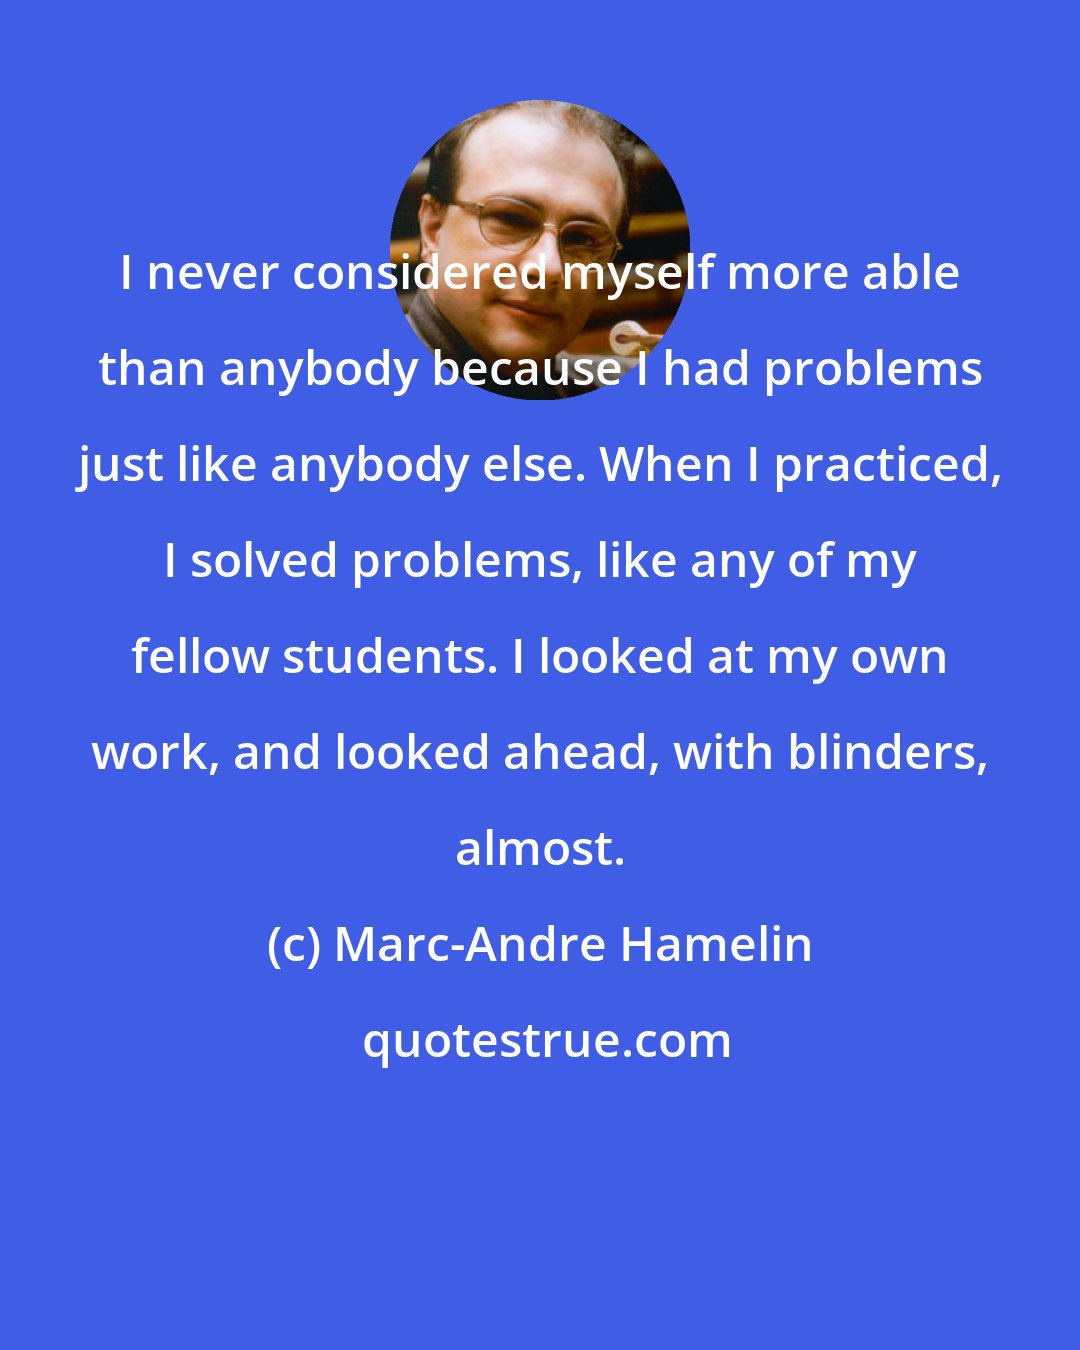 Marc-Andre Hamelin: I never considered myself more able than anybody because I had problems just like anybody else. When I practiced, I solved problems, like any of my fellow students. I looked at my own work, and looked ahead, with blinders, almost.